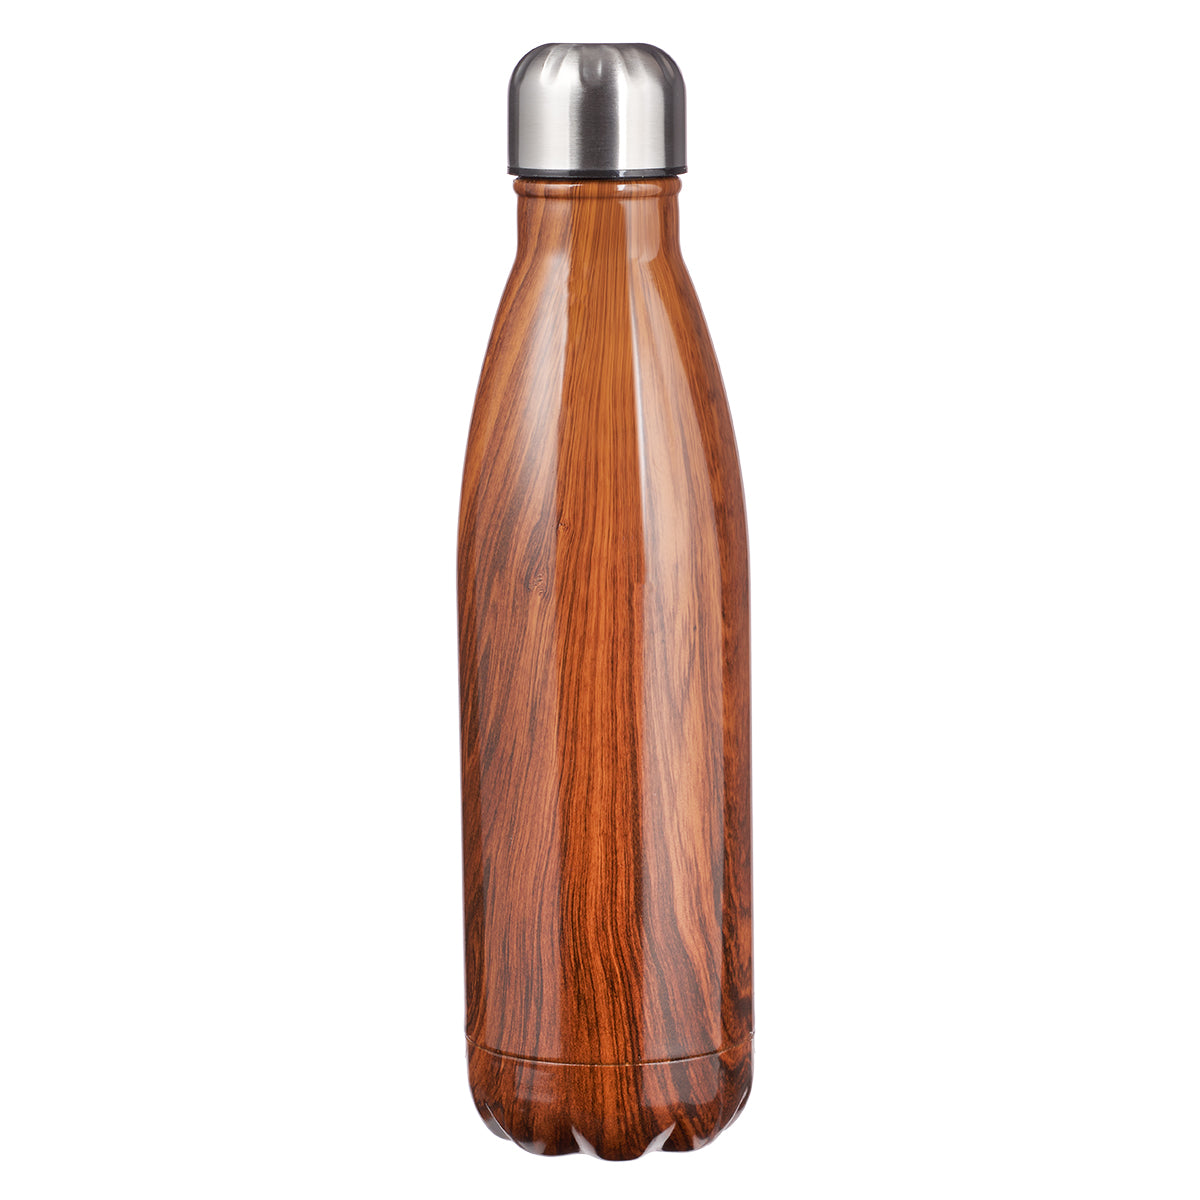 Image of Man of God Wood Design Stainless Steel Water Bottle - 1 Timothy 6:11 other